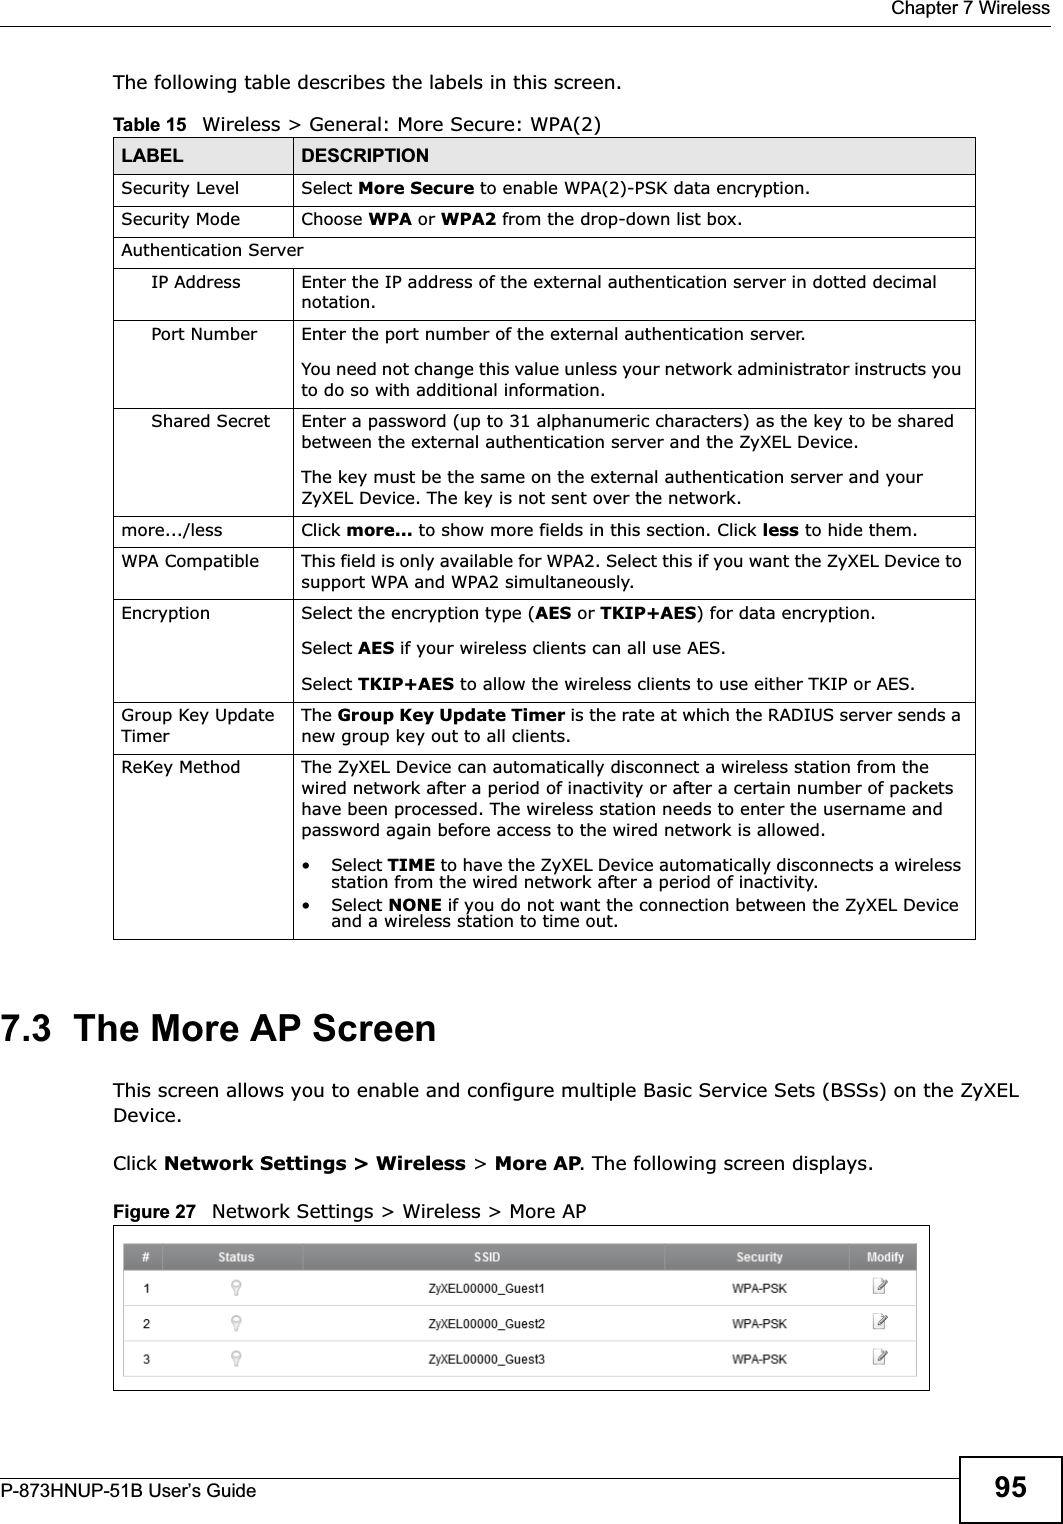  Chapter 7 WirelessP-873HNUP-51B User’s Guide 95The following table describes the labels in this screen.7.3  The More AP ScreenThis screen allows you to enable and configure multiple Basic Service Sets (BSSs) on the ZyXEL Device.Click Network Settings &gt; Wireless &gt; More AP. The following screen displays.Figure 27   Network Settings &gt; Wireless &gt; More APTable 15   Wireless &gt; General: More Secure: WPA(2)LABEL DESCRIPTIONSecurity Level Select More Secure to enable WPA(2)-PSK data encryption.Security Mode Choose WPA or WPA2 from the drop-down list box.Authentication ServerIP Address Enter the IP address of the external authentication server in dotted decimal notation.Port Number Enter the port number of the external authentication server.  You need not change this value unless your network administrator instructs you to do so with additional information. Shared Secret Enter a password (up to 31 alphanumeric characters) as the key to be shared between the external authentication server and the ZyXEL Device.The key must be the same on the external authentication server and your ZyXEL Device. The key is not sent over the network. more.../less Click more... to show more fields in this section. Click less to hide them.WPA Compatible This field is only available for WPA2. Select this if you want the ZyXEL Device to support WPA and WPA2 simultaneously.Encryption Select the encryption type (AES or TKIP+AES) for data encryption.Select AES if your wireless clients can all use AES.Select TKIP+AES to allow the wireless clients to use either TKIP or AES.Group Key Update TimerThe Group Key Update Timer is the rate at which the RADIUS server sends a new group key out to all clients. ReKey Method The ZyXEL Device can automatically disconnect a wireless station from the wired network after a period of inactivity or after a certain number of packets have been processed. The wireless station needs to enter the username and password again before access to the wired network is allowed. • Select TIME to have the ZyXEL Device automatically disconnects a wireless station from the wired network after a period of inactivity.• Select NONE if you do not want the connection between the ZyXEL Device and a wireless station to time out.